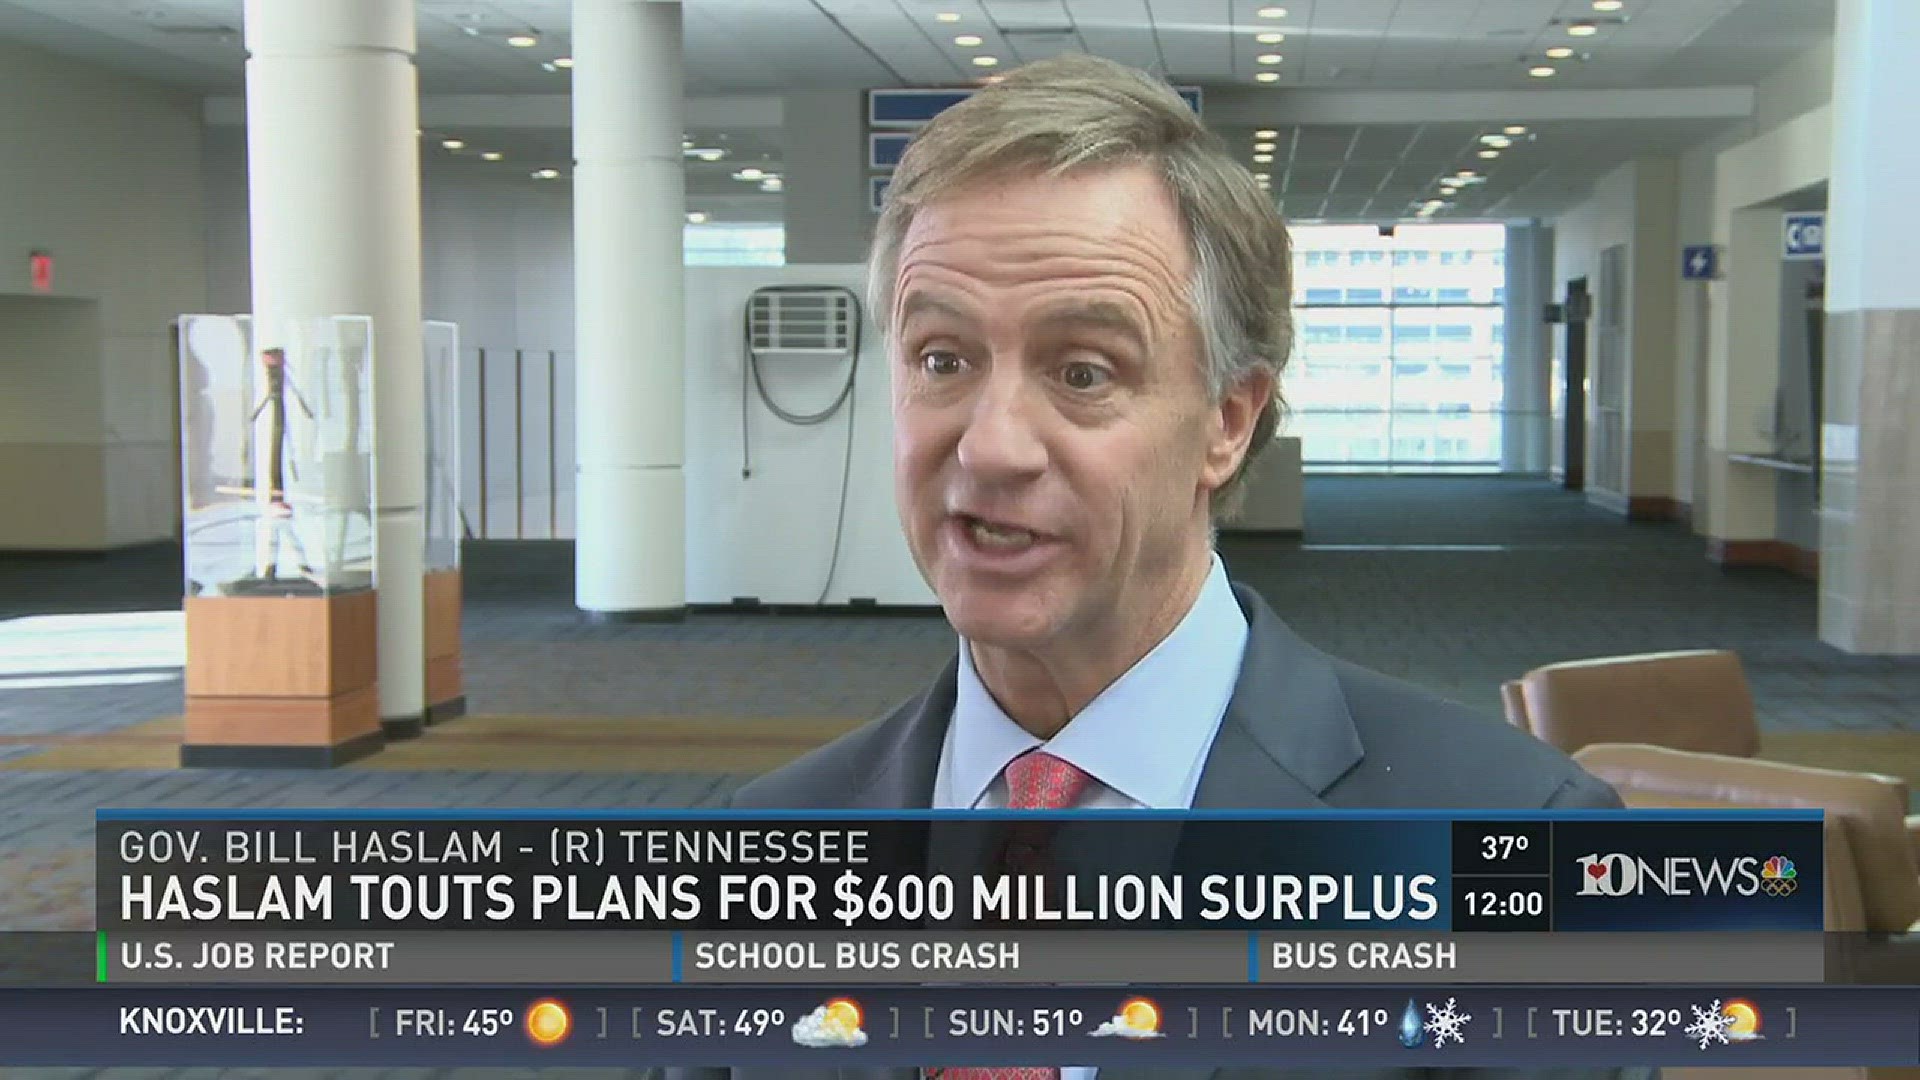 Gov. Bill Haslam said education is his priority with a $600 million surplus.